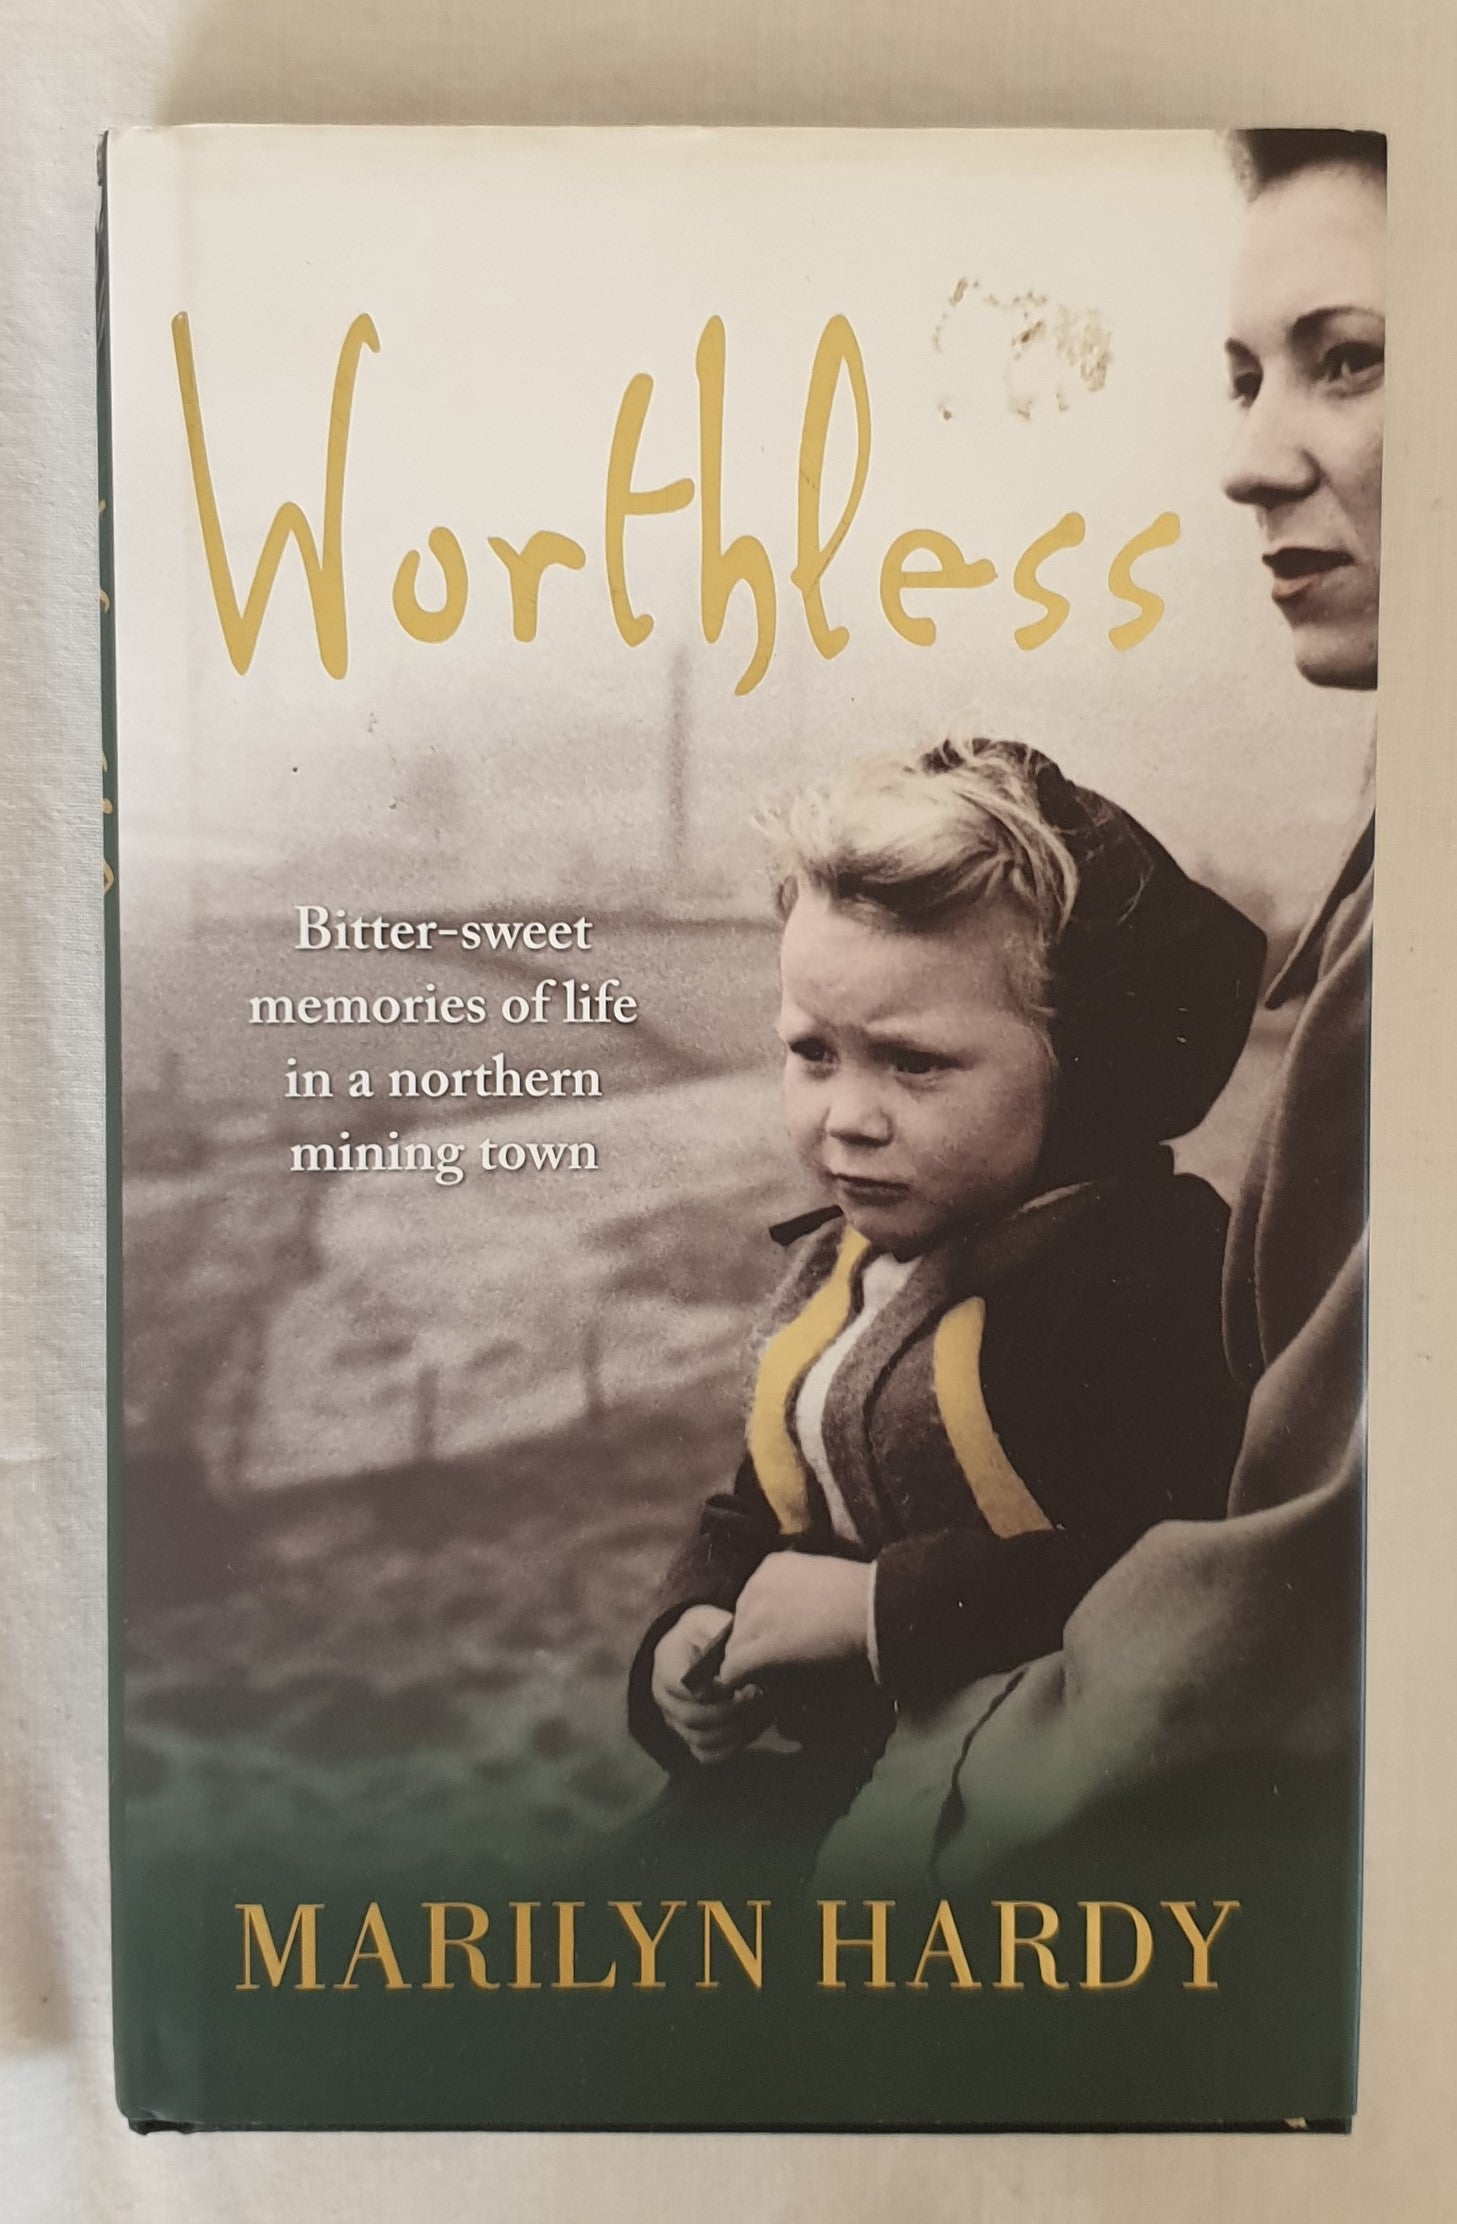 Worthless by Marilyn Hardy